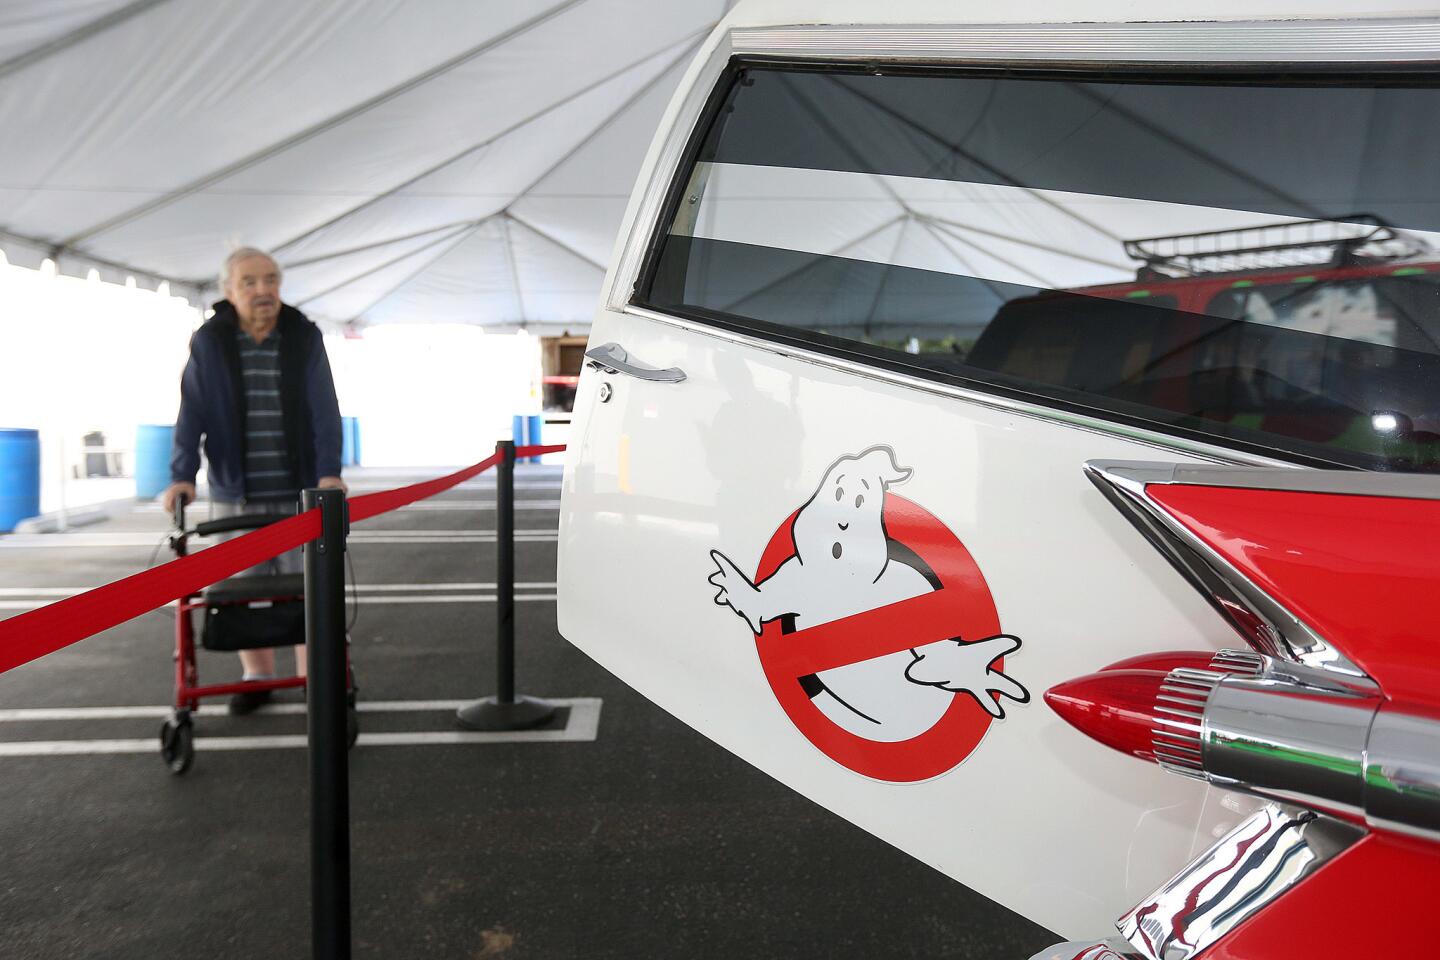 Photo Gallery: Ghostbusters, Back to the Future, Jurassic Park, and Knight Rider cars on display at Burbank Walmart